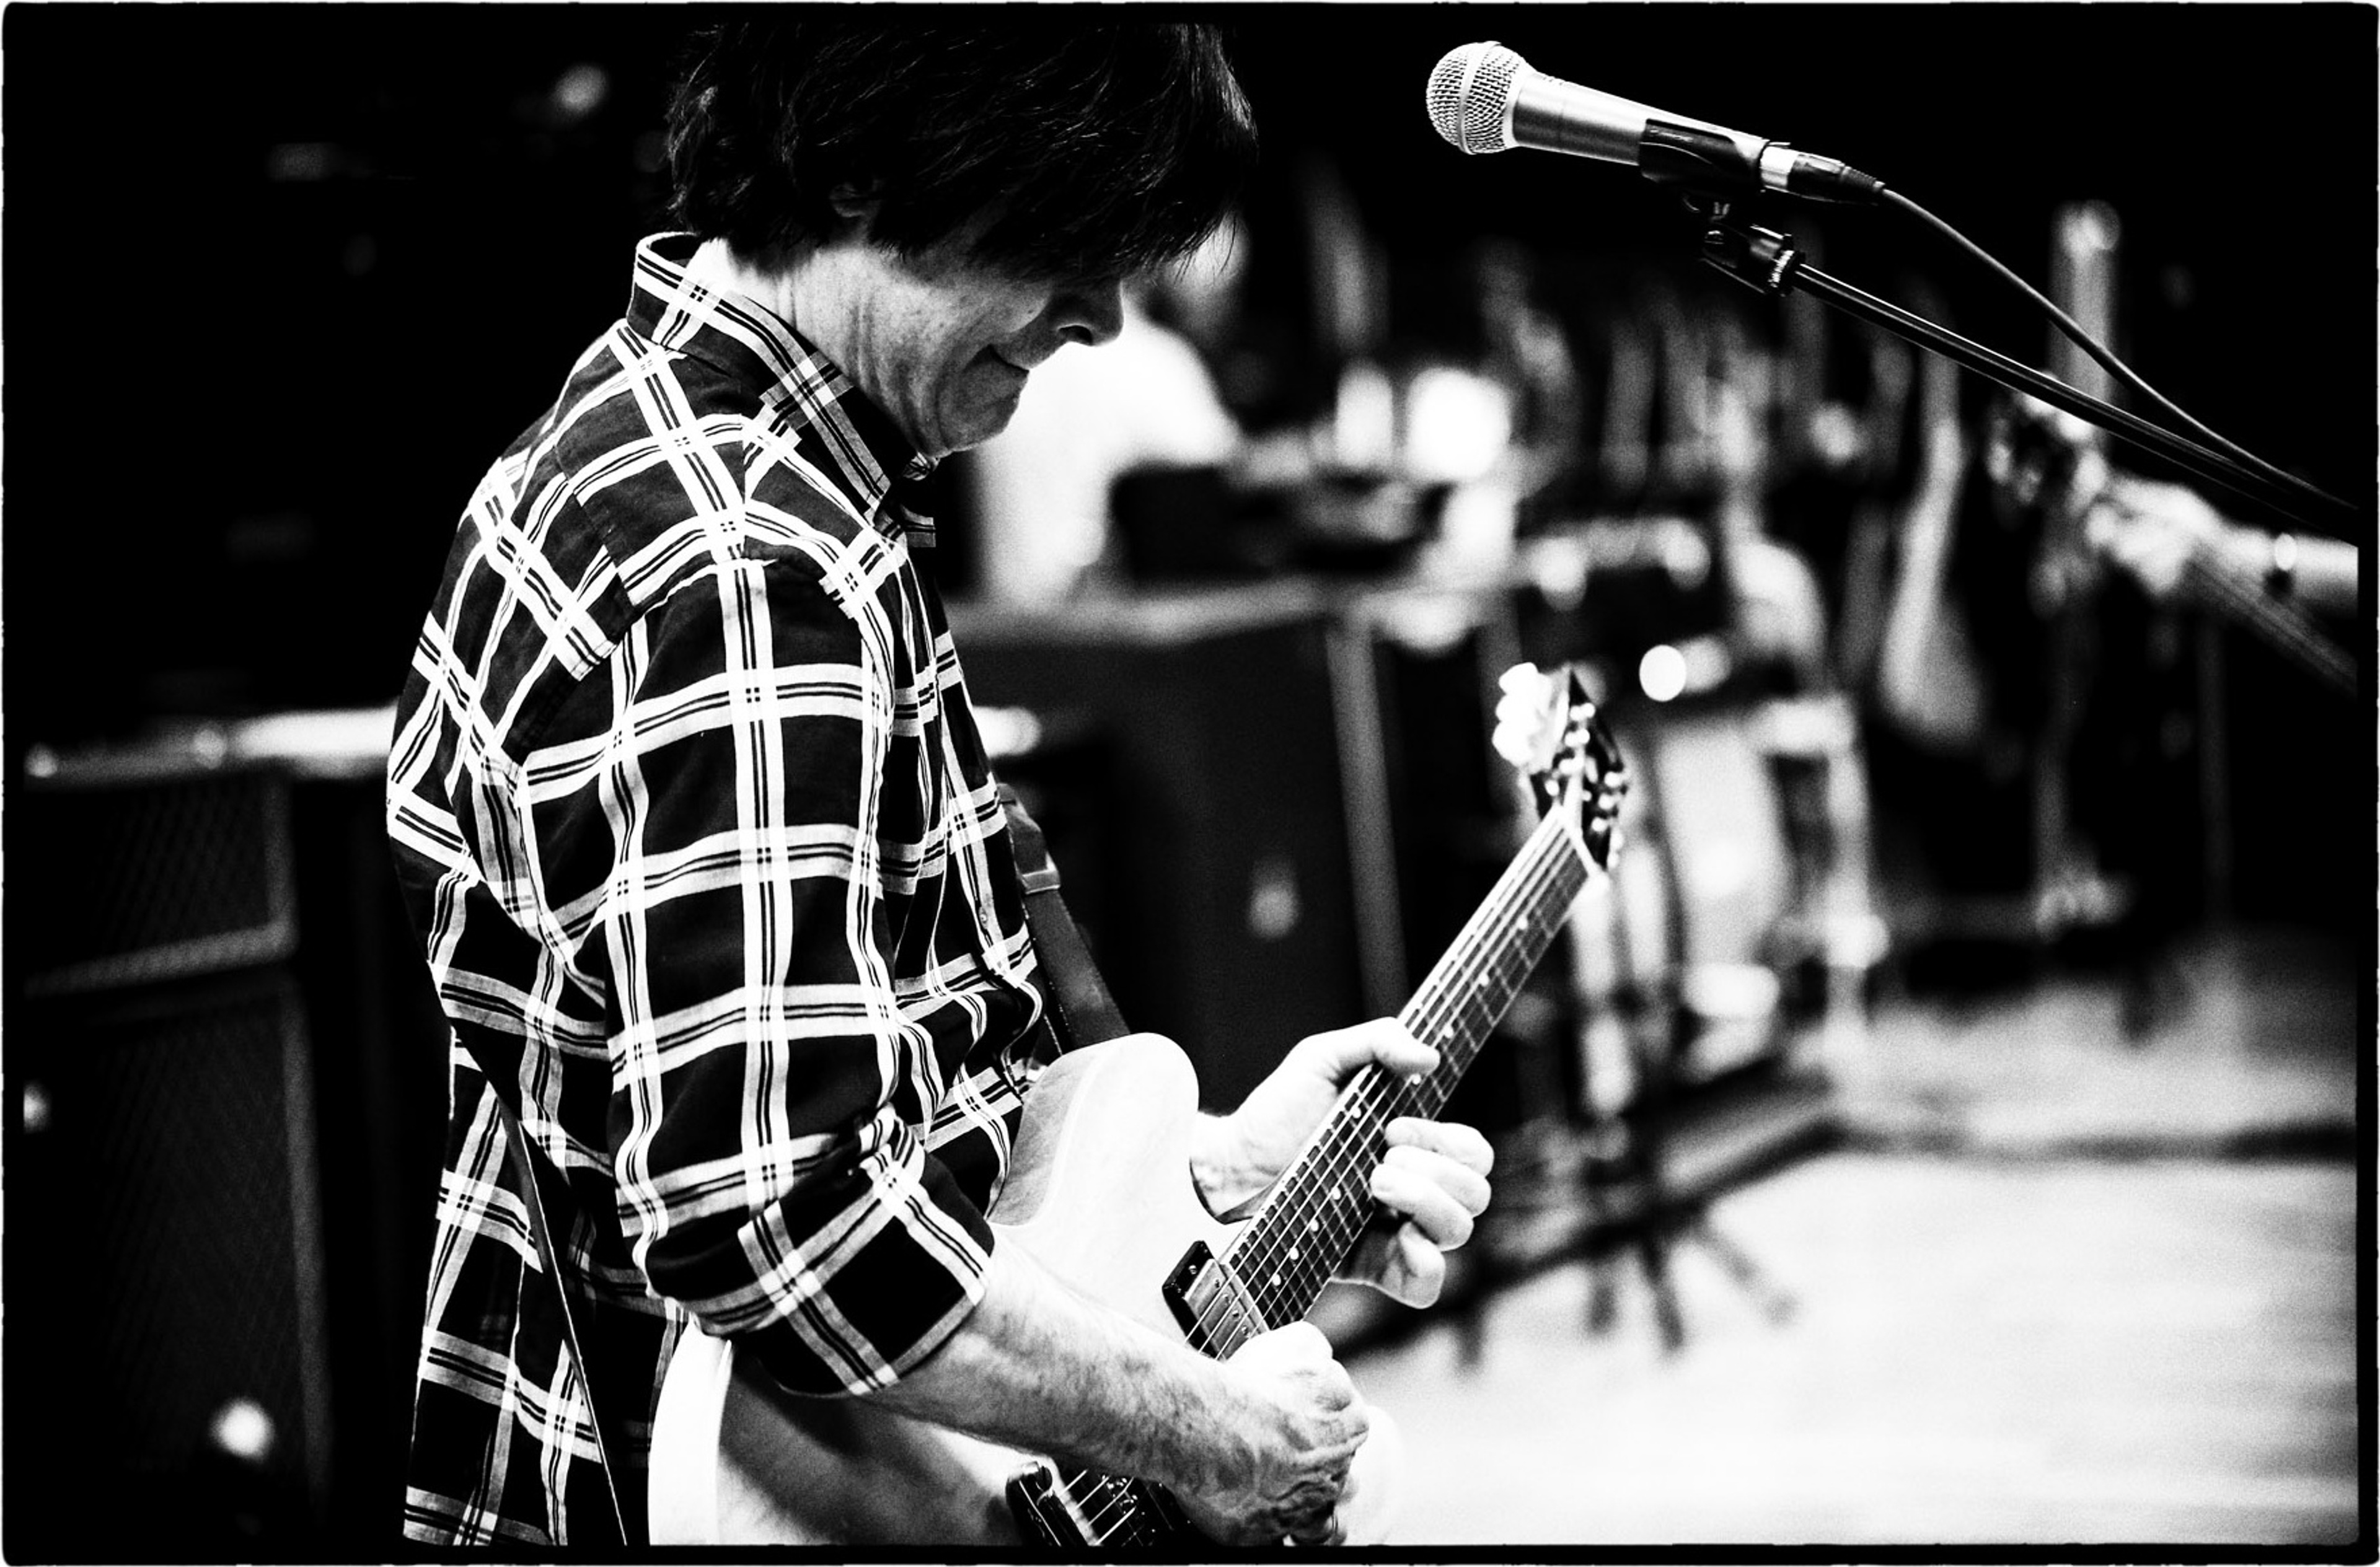 Rusty at rehearsals, Los Angeles, April 13th 2013